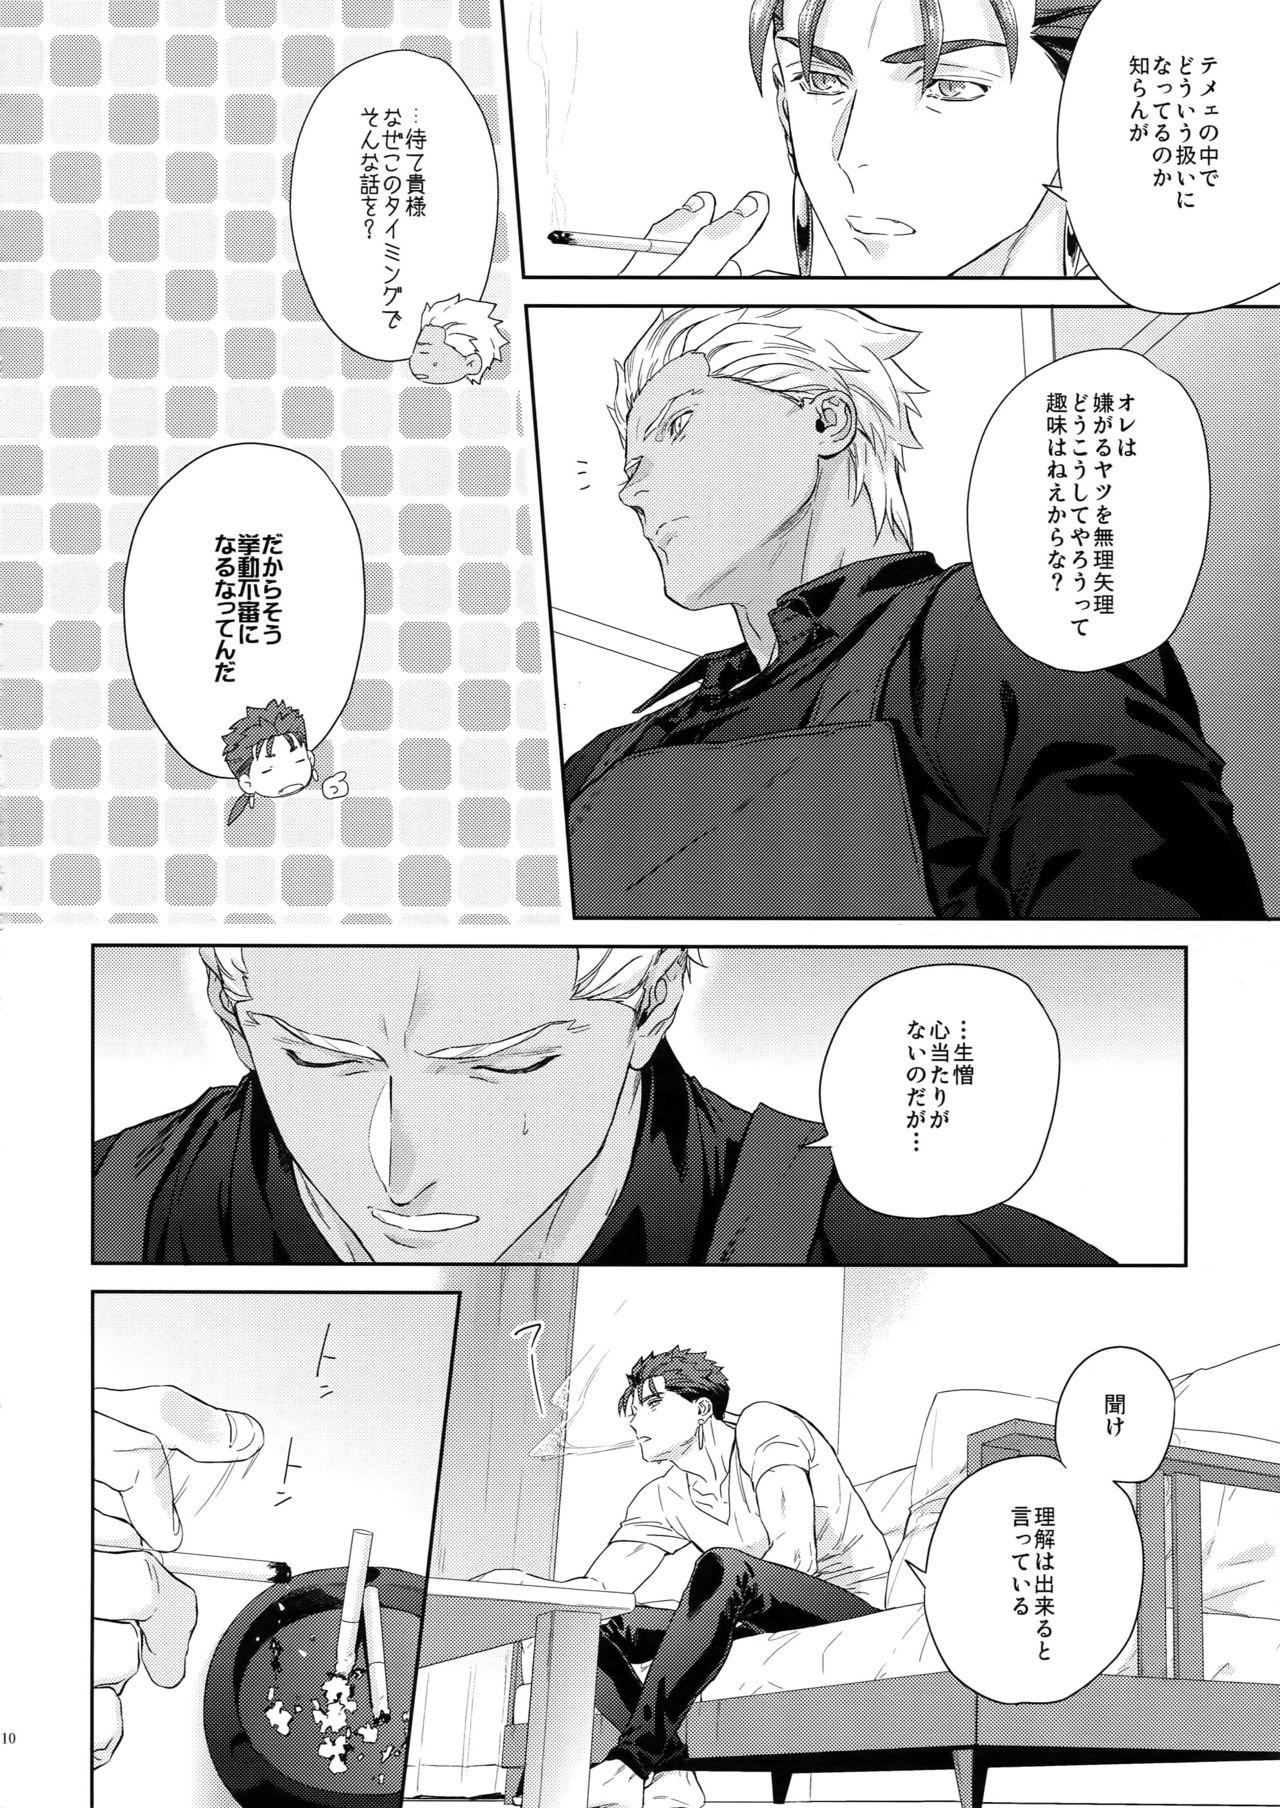 Ngentot parfum - Fate stay night Kissing - Page 9